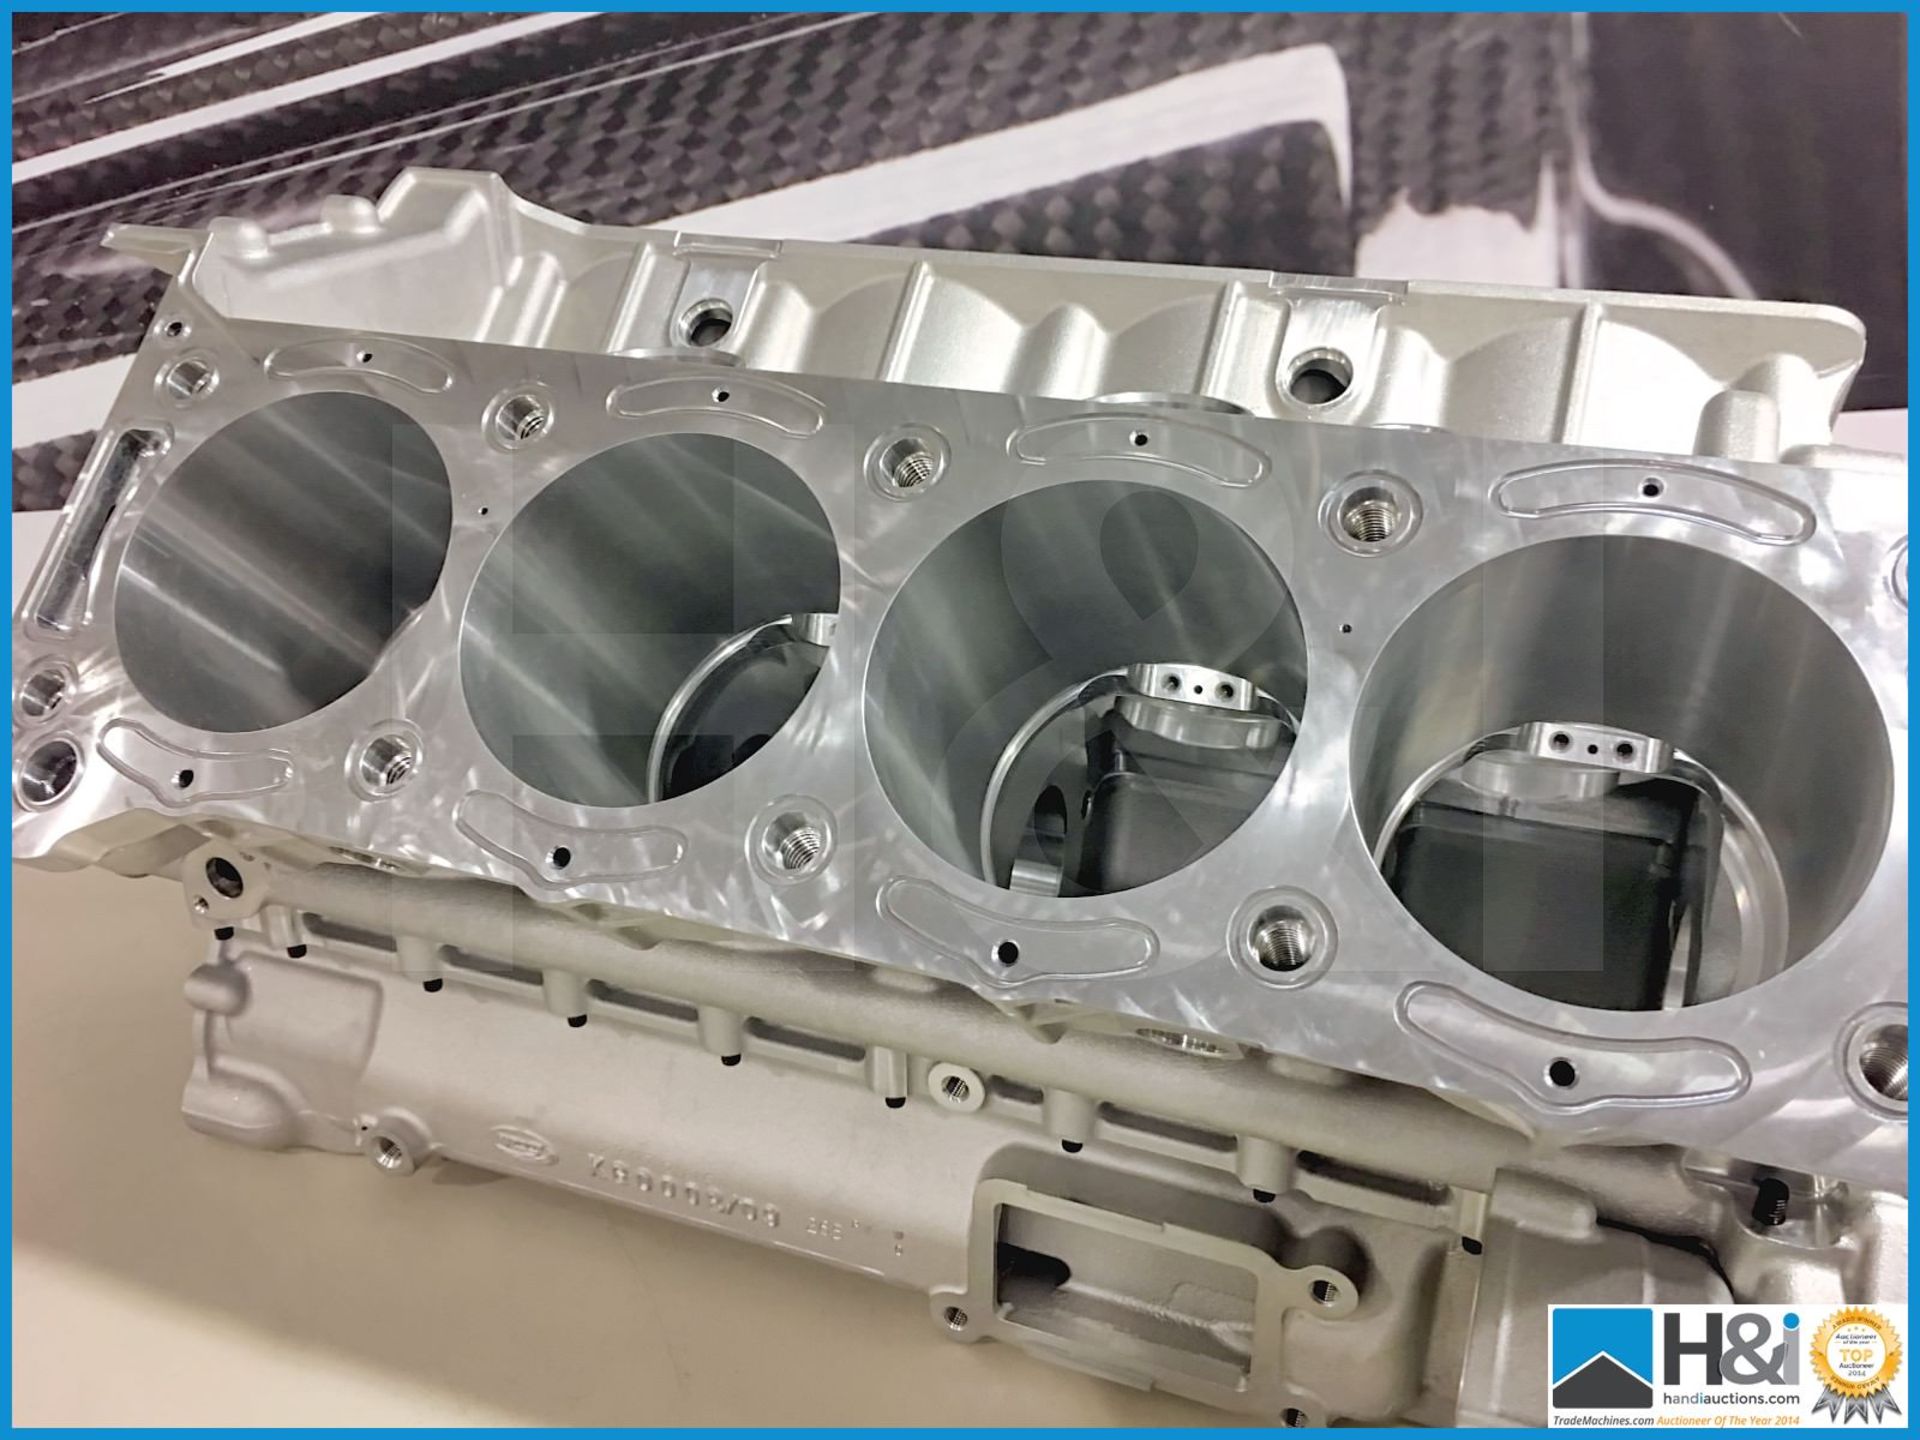 Cosworth XG cylinder block and sump assembly. -- MC:XG8015C CILN:83 - Image 6 of 9